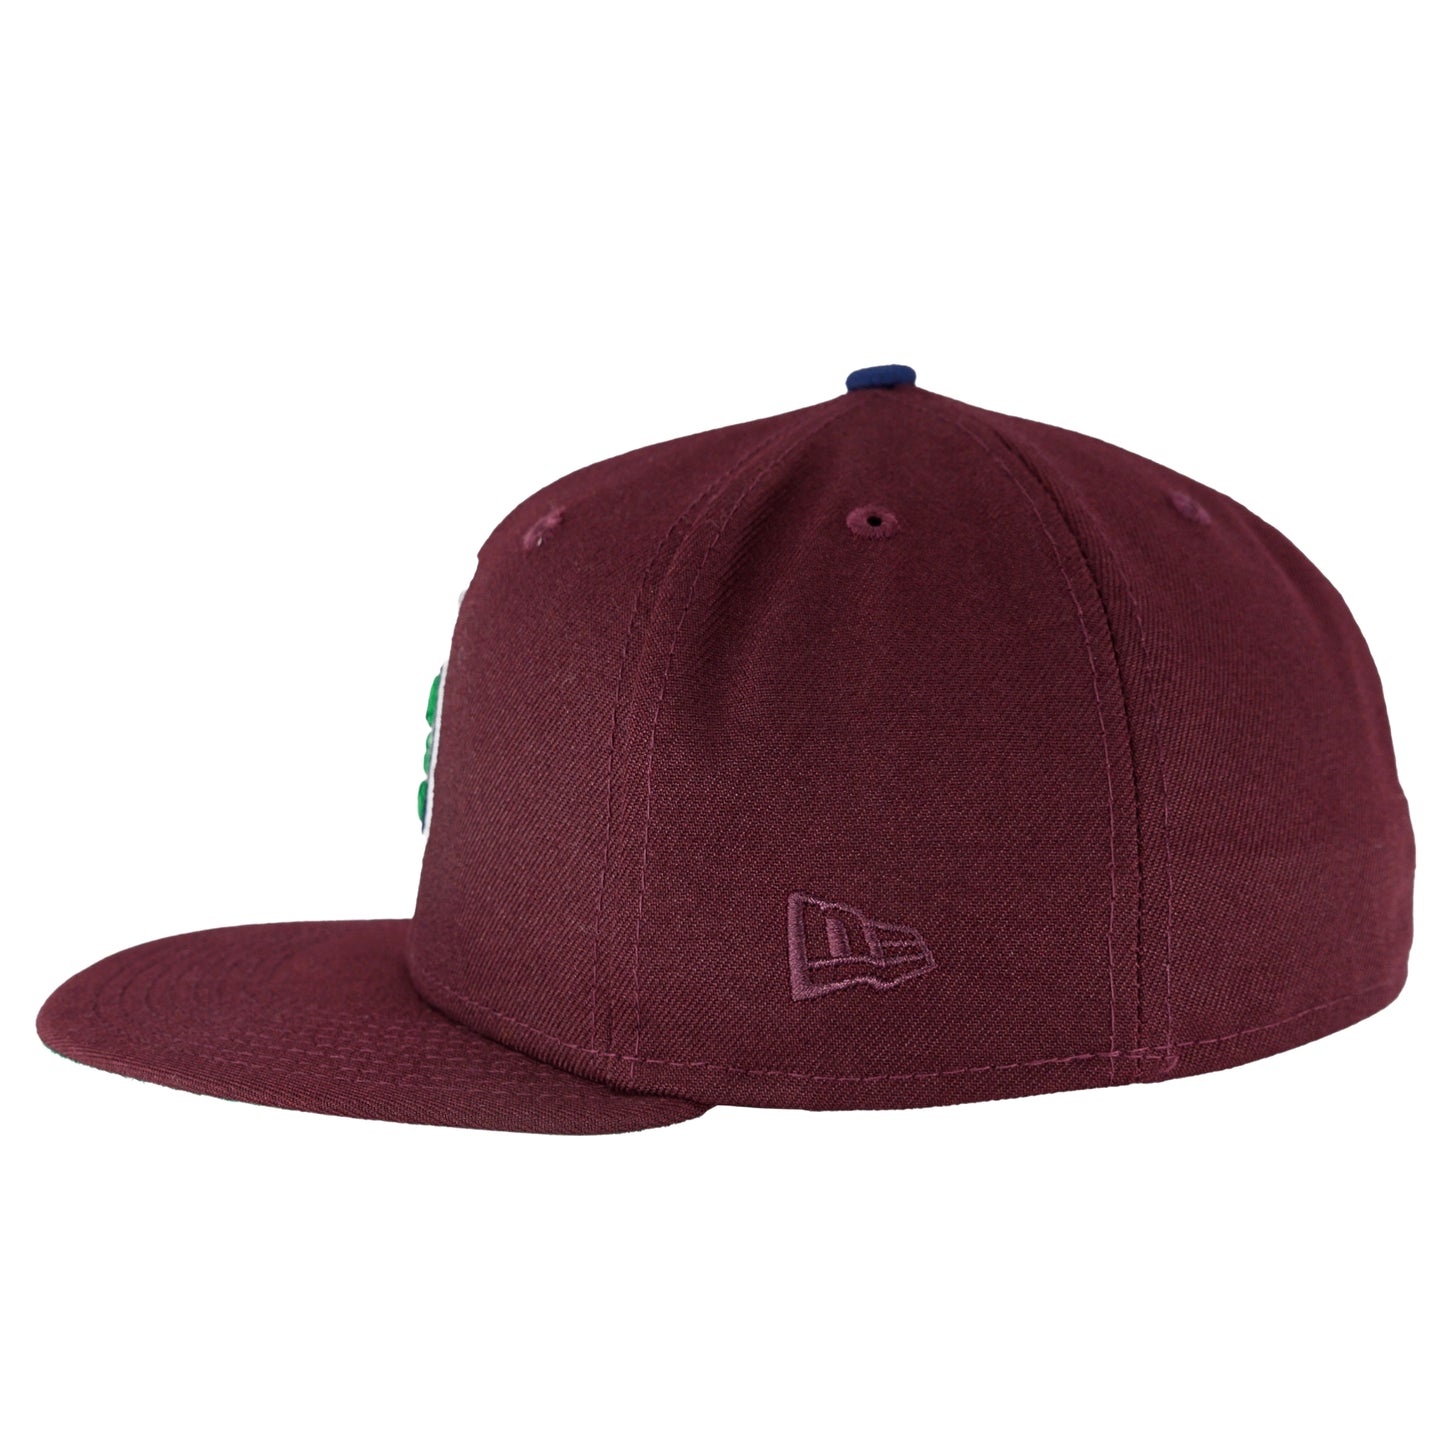 Chicago Cubs Maroon UV Navy New Era 59FIFTY Fitted Hat